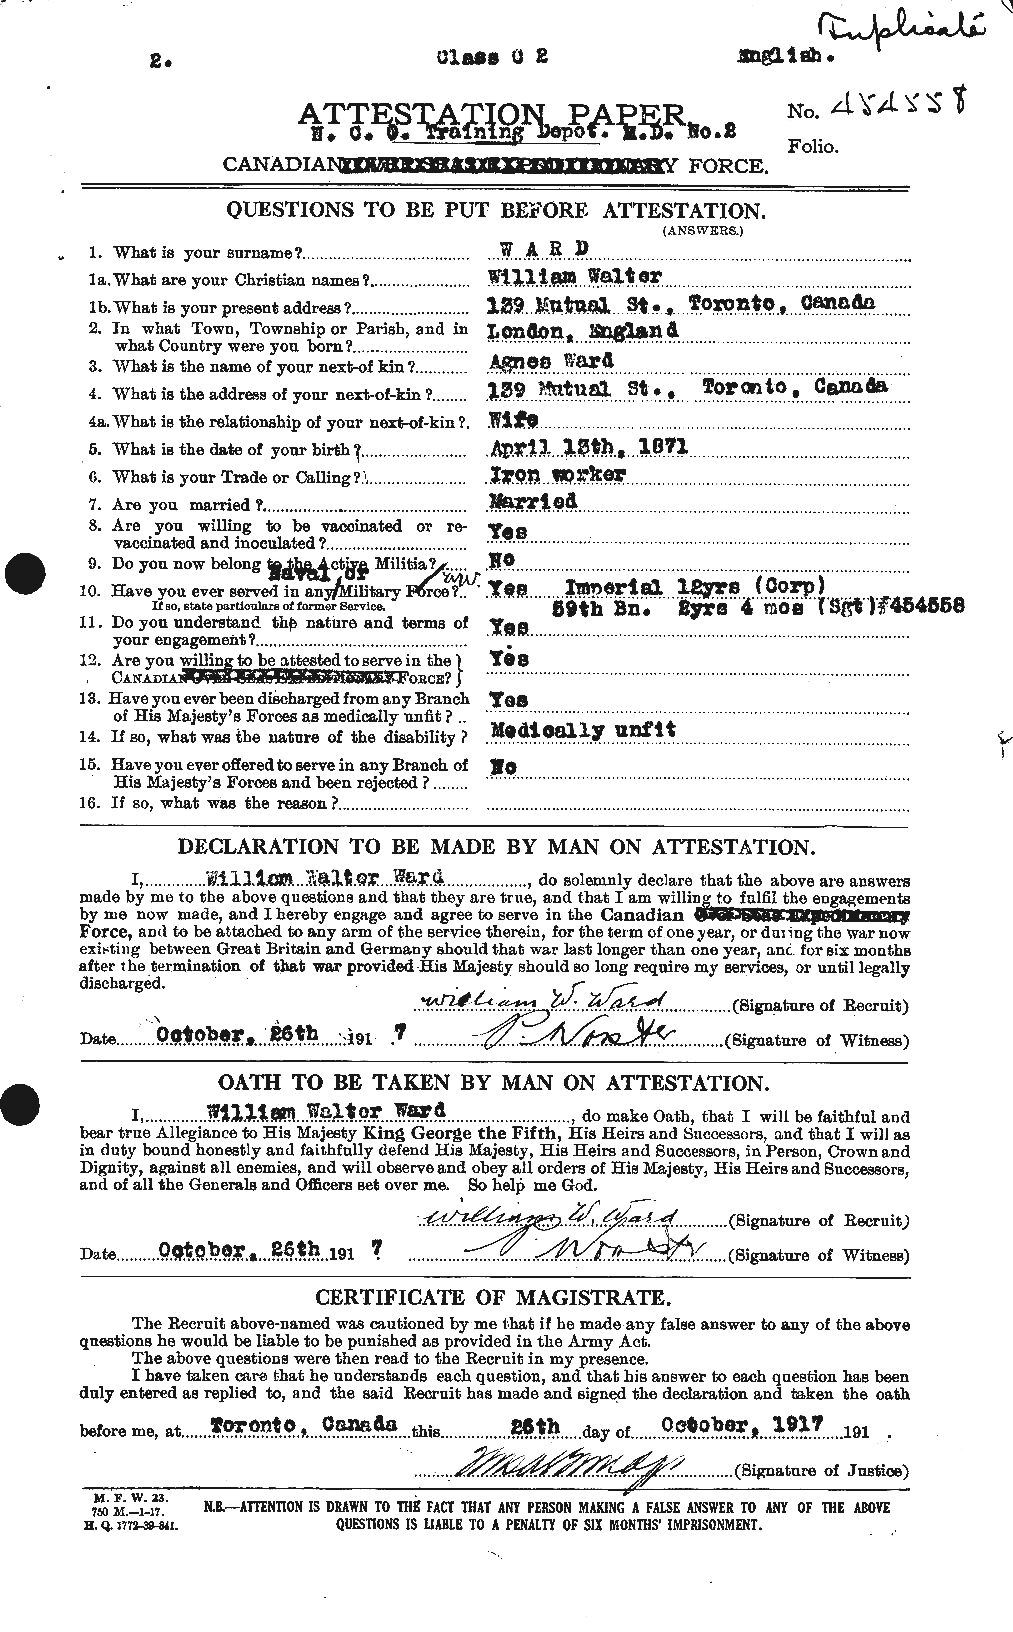 Personnel Records of the First World War - CEF 659847a